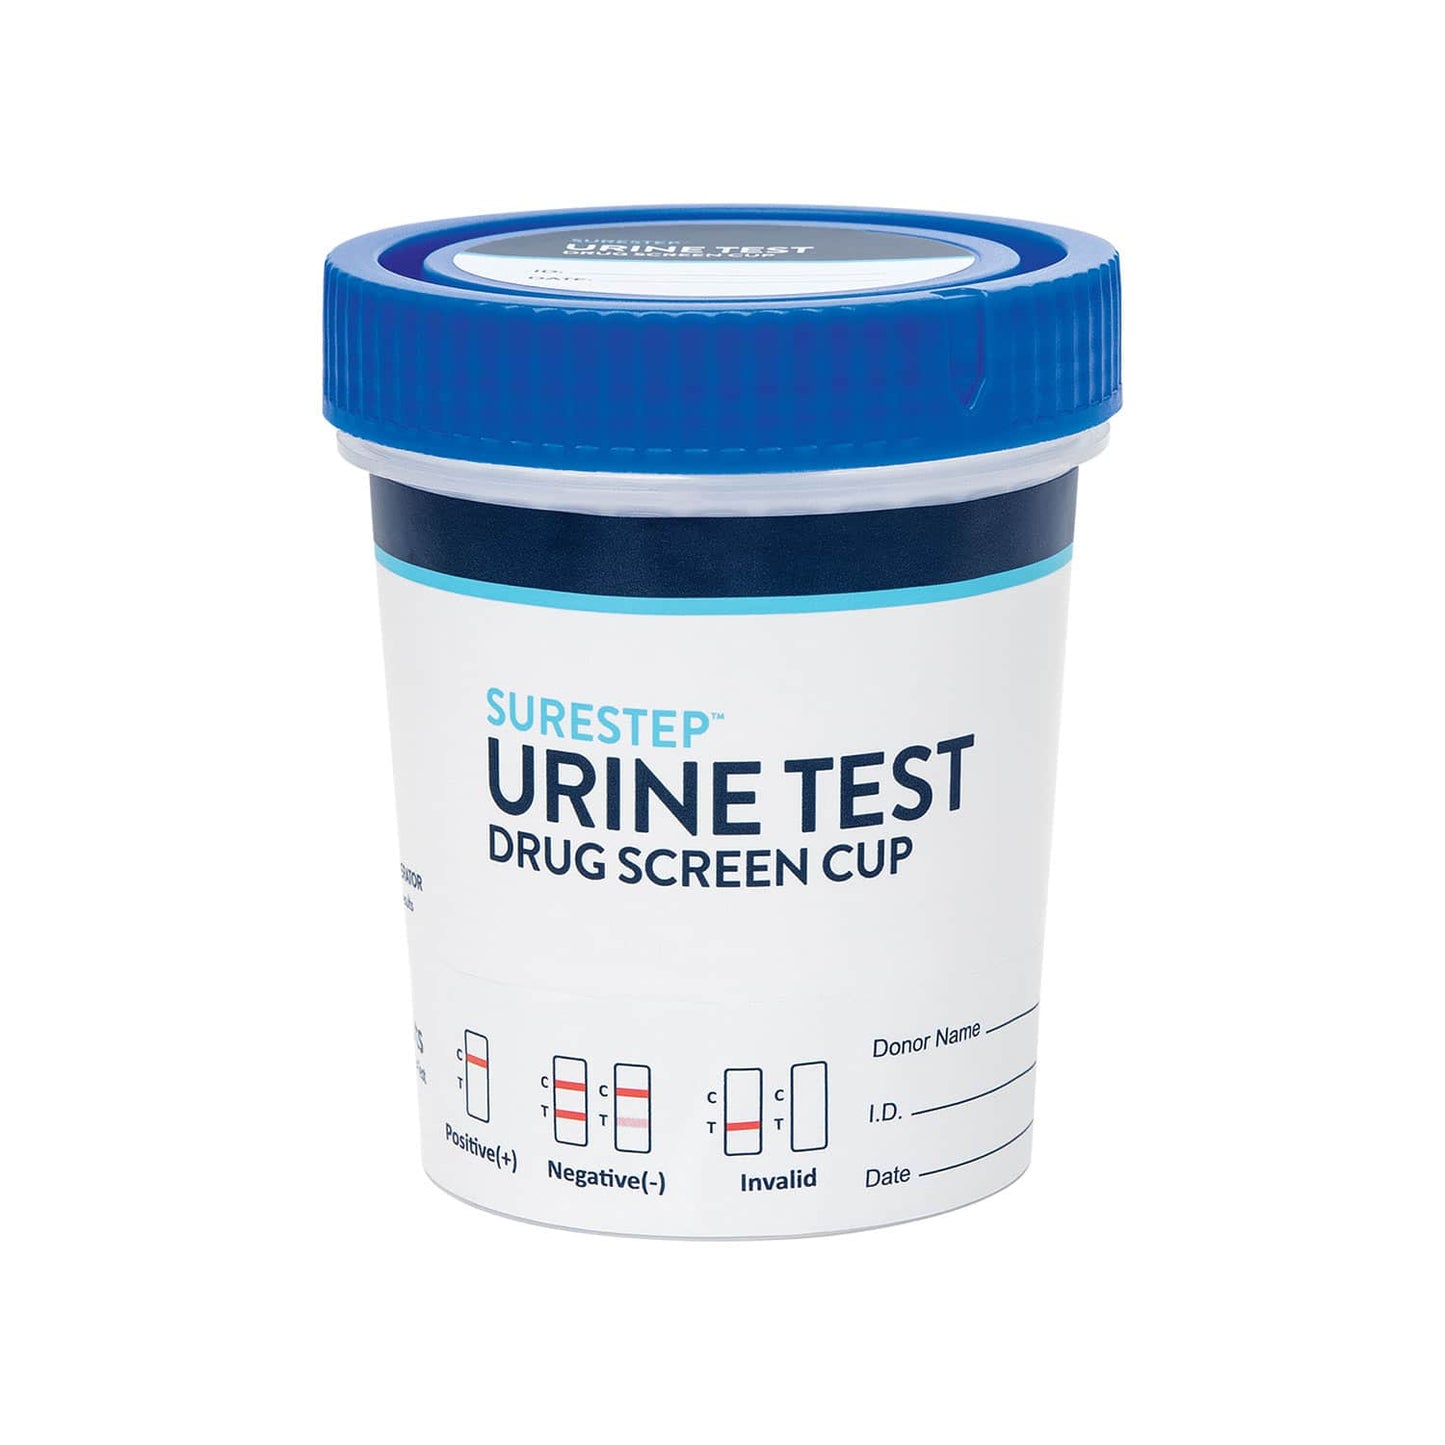 Surestep™ Urine Test Drug Screen Cup (16) Minimises Contact With Urine